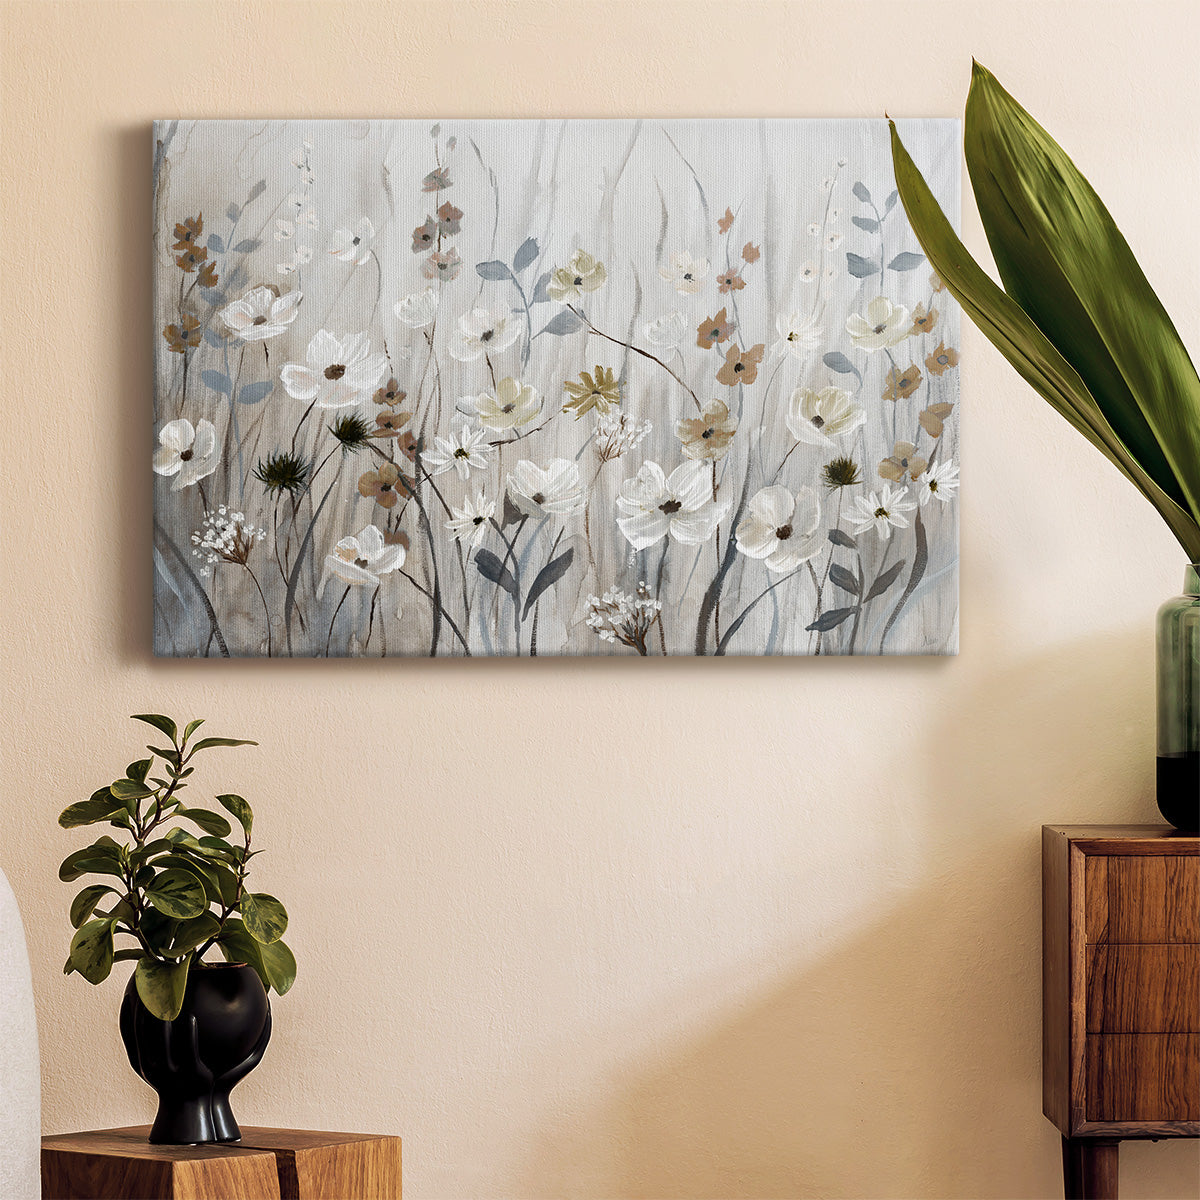 Misty Meadow Field Premium Gallery Wrapped Canvas - Ready to Hang